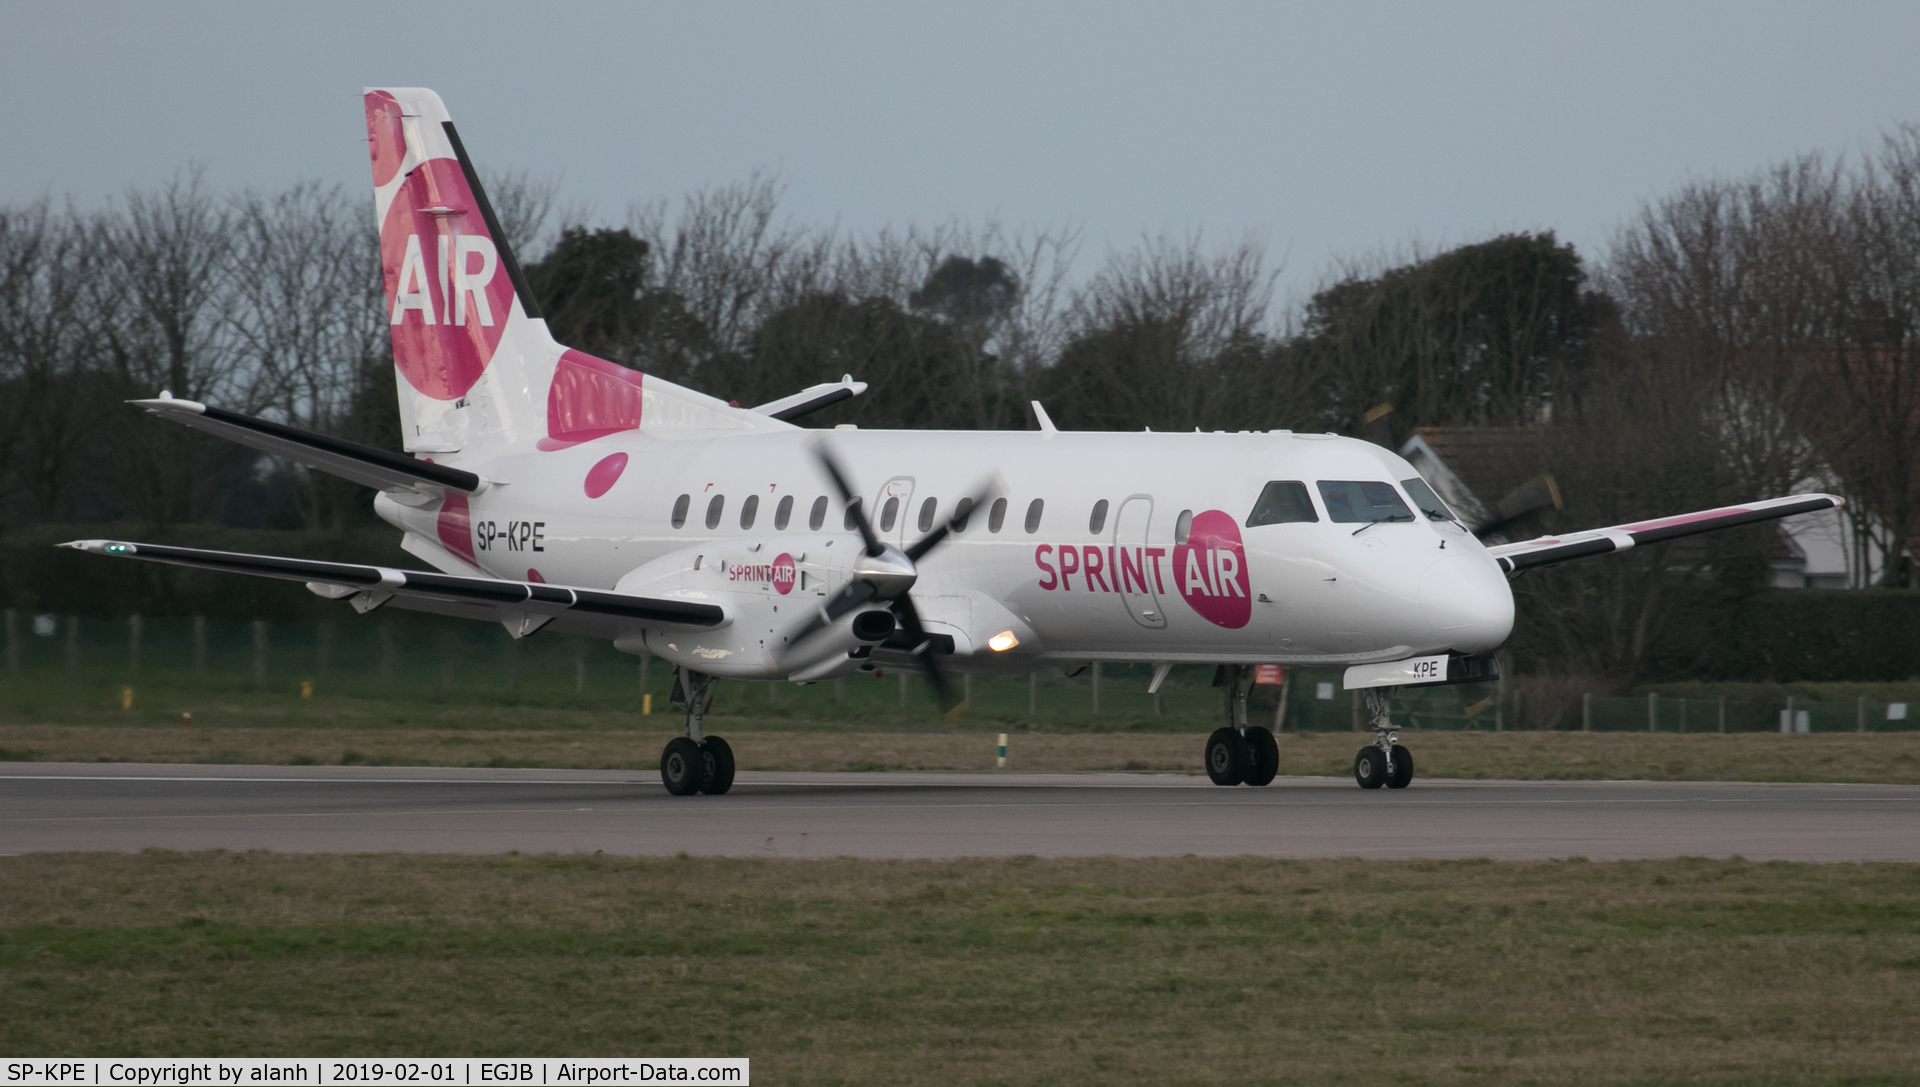 SP-KPE, 1988 Saab 340A C/N 340A-130, Arriving at Guersey, operating an East Midlands service for Aurigny